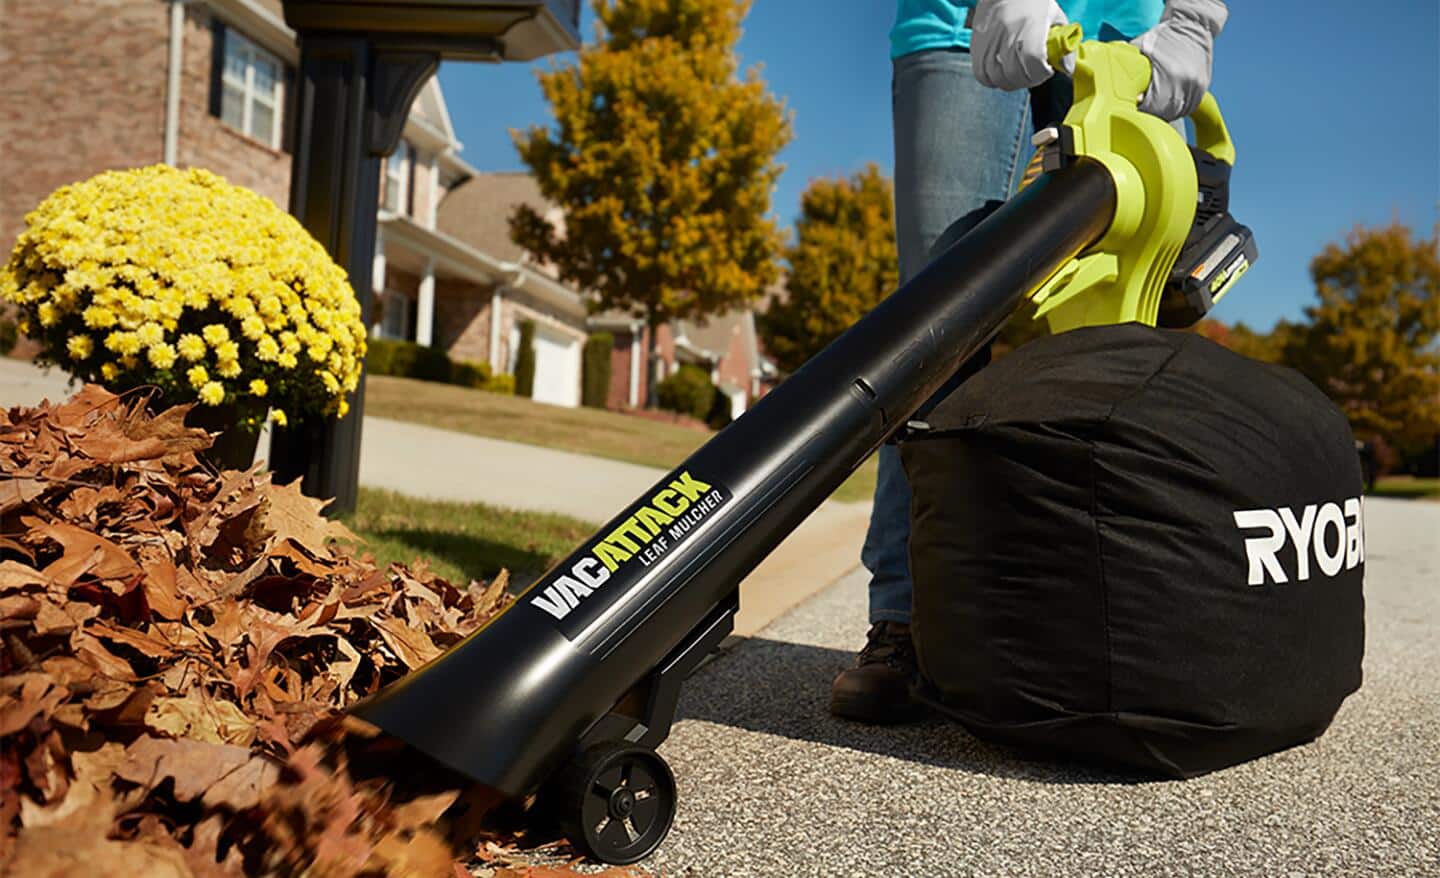 A person uses a leaf blower with a mulching bag to collect leaves.